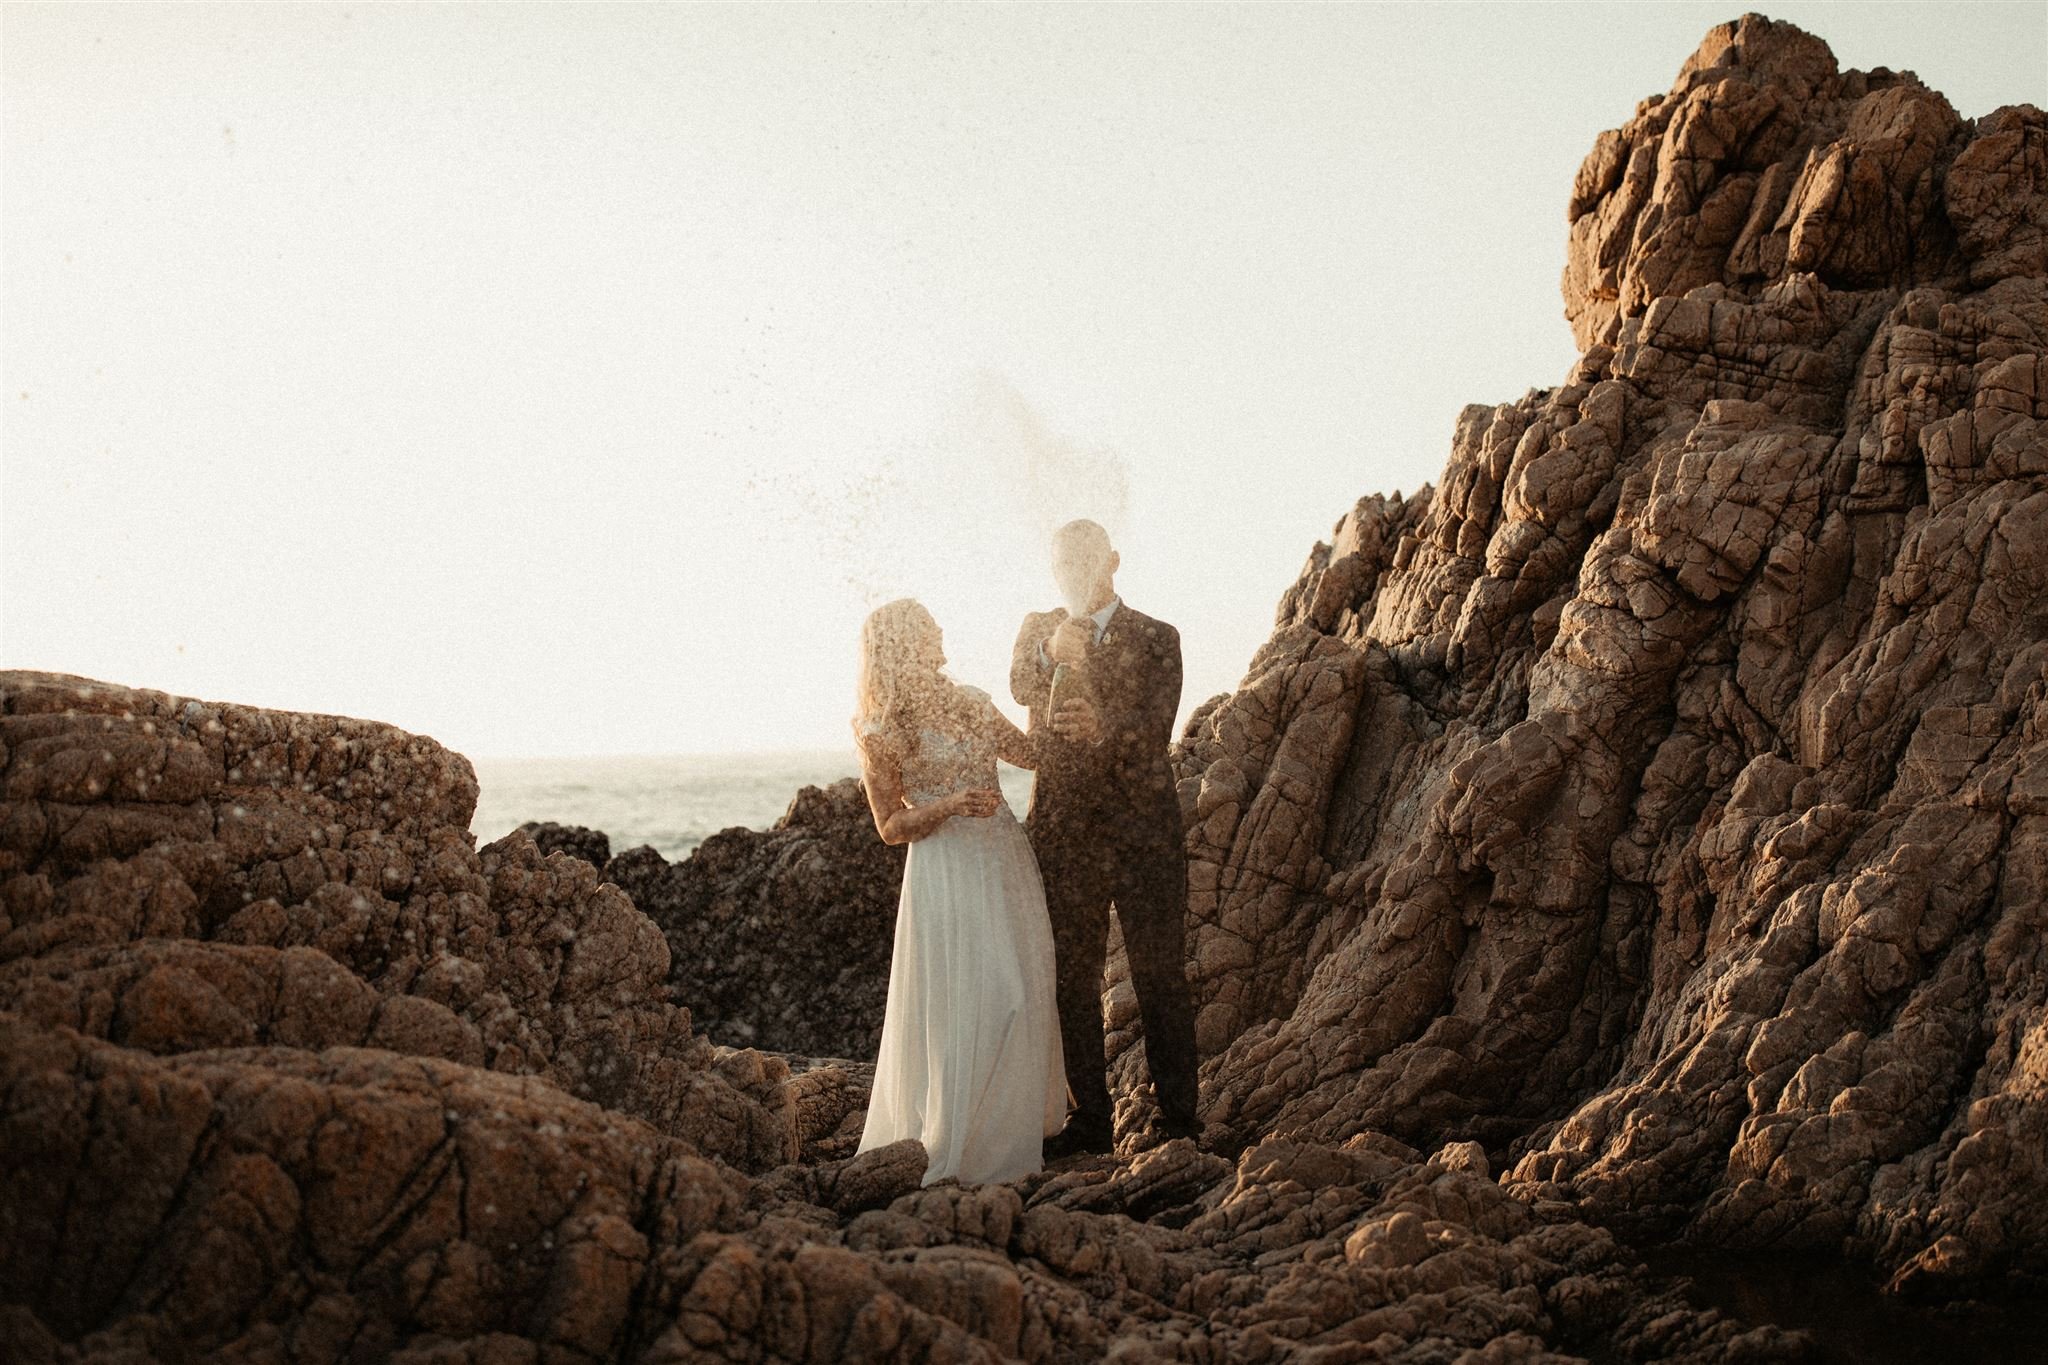 50-How-to-elope-in-Big-Sur-by-Will-Khoury.jpg